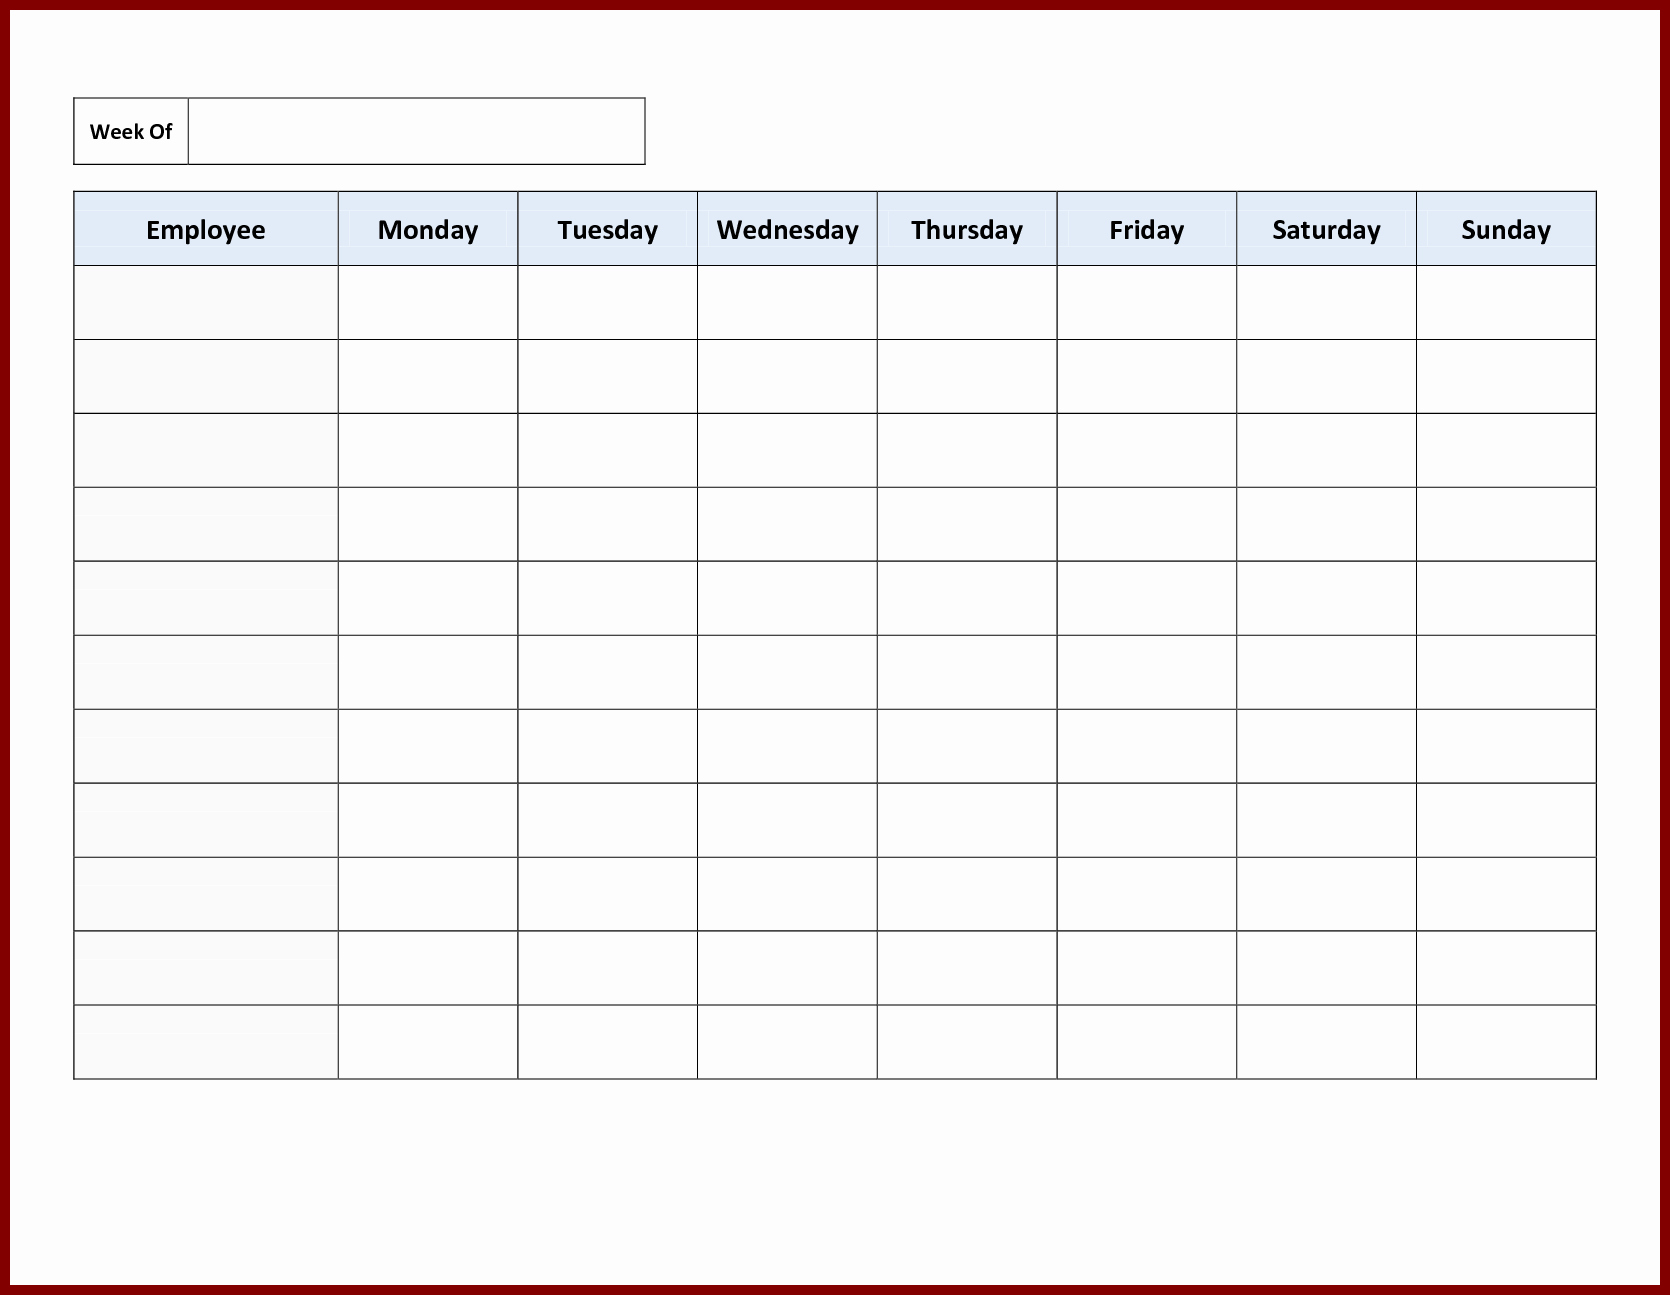 Monthly Employee Schedule Template Excel Awesome Monthly Employee Work Schedule Template Excel and 13 Free